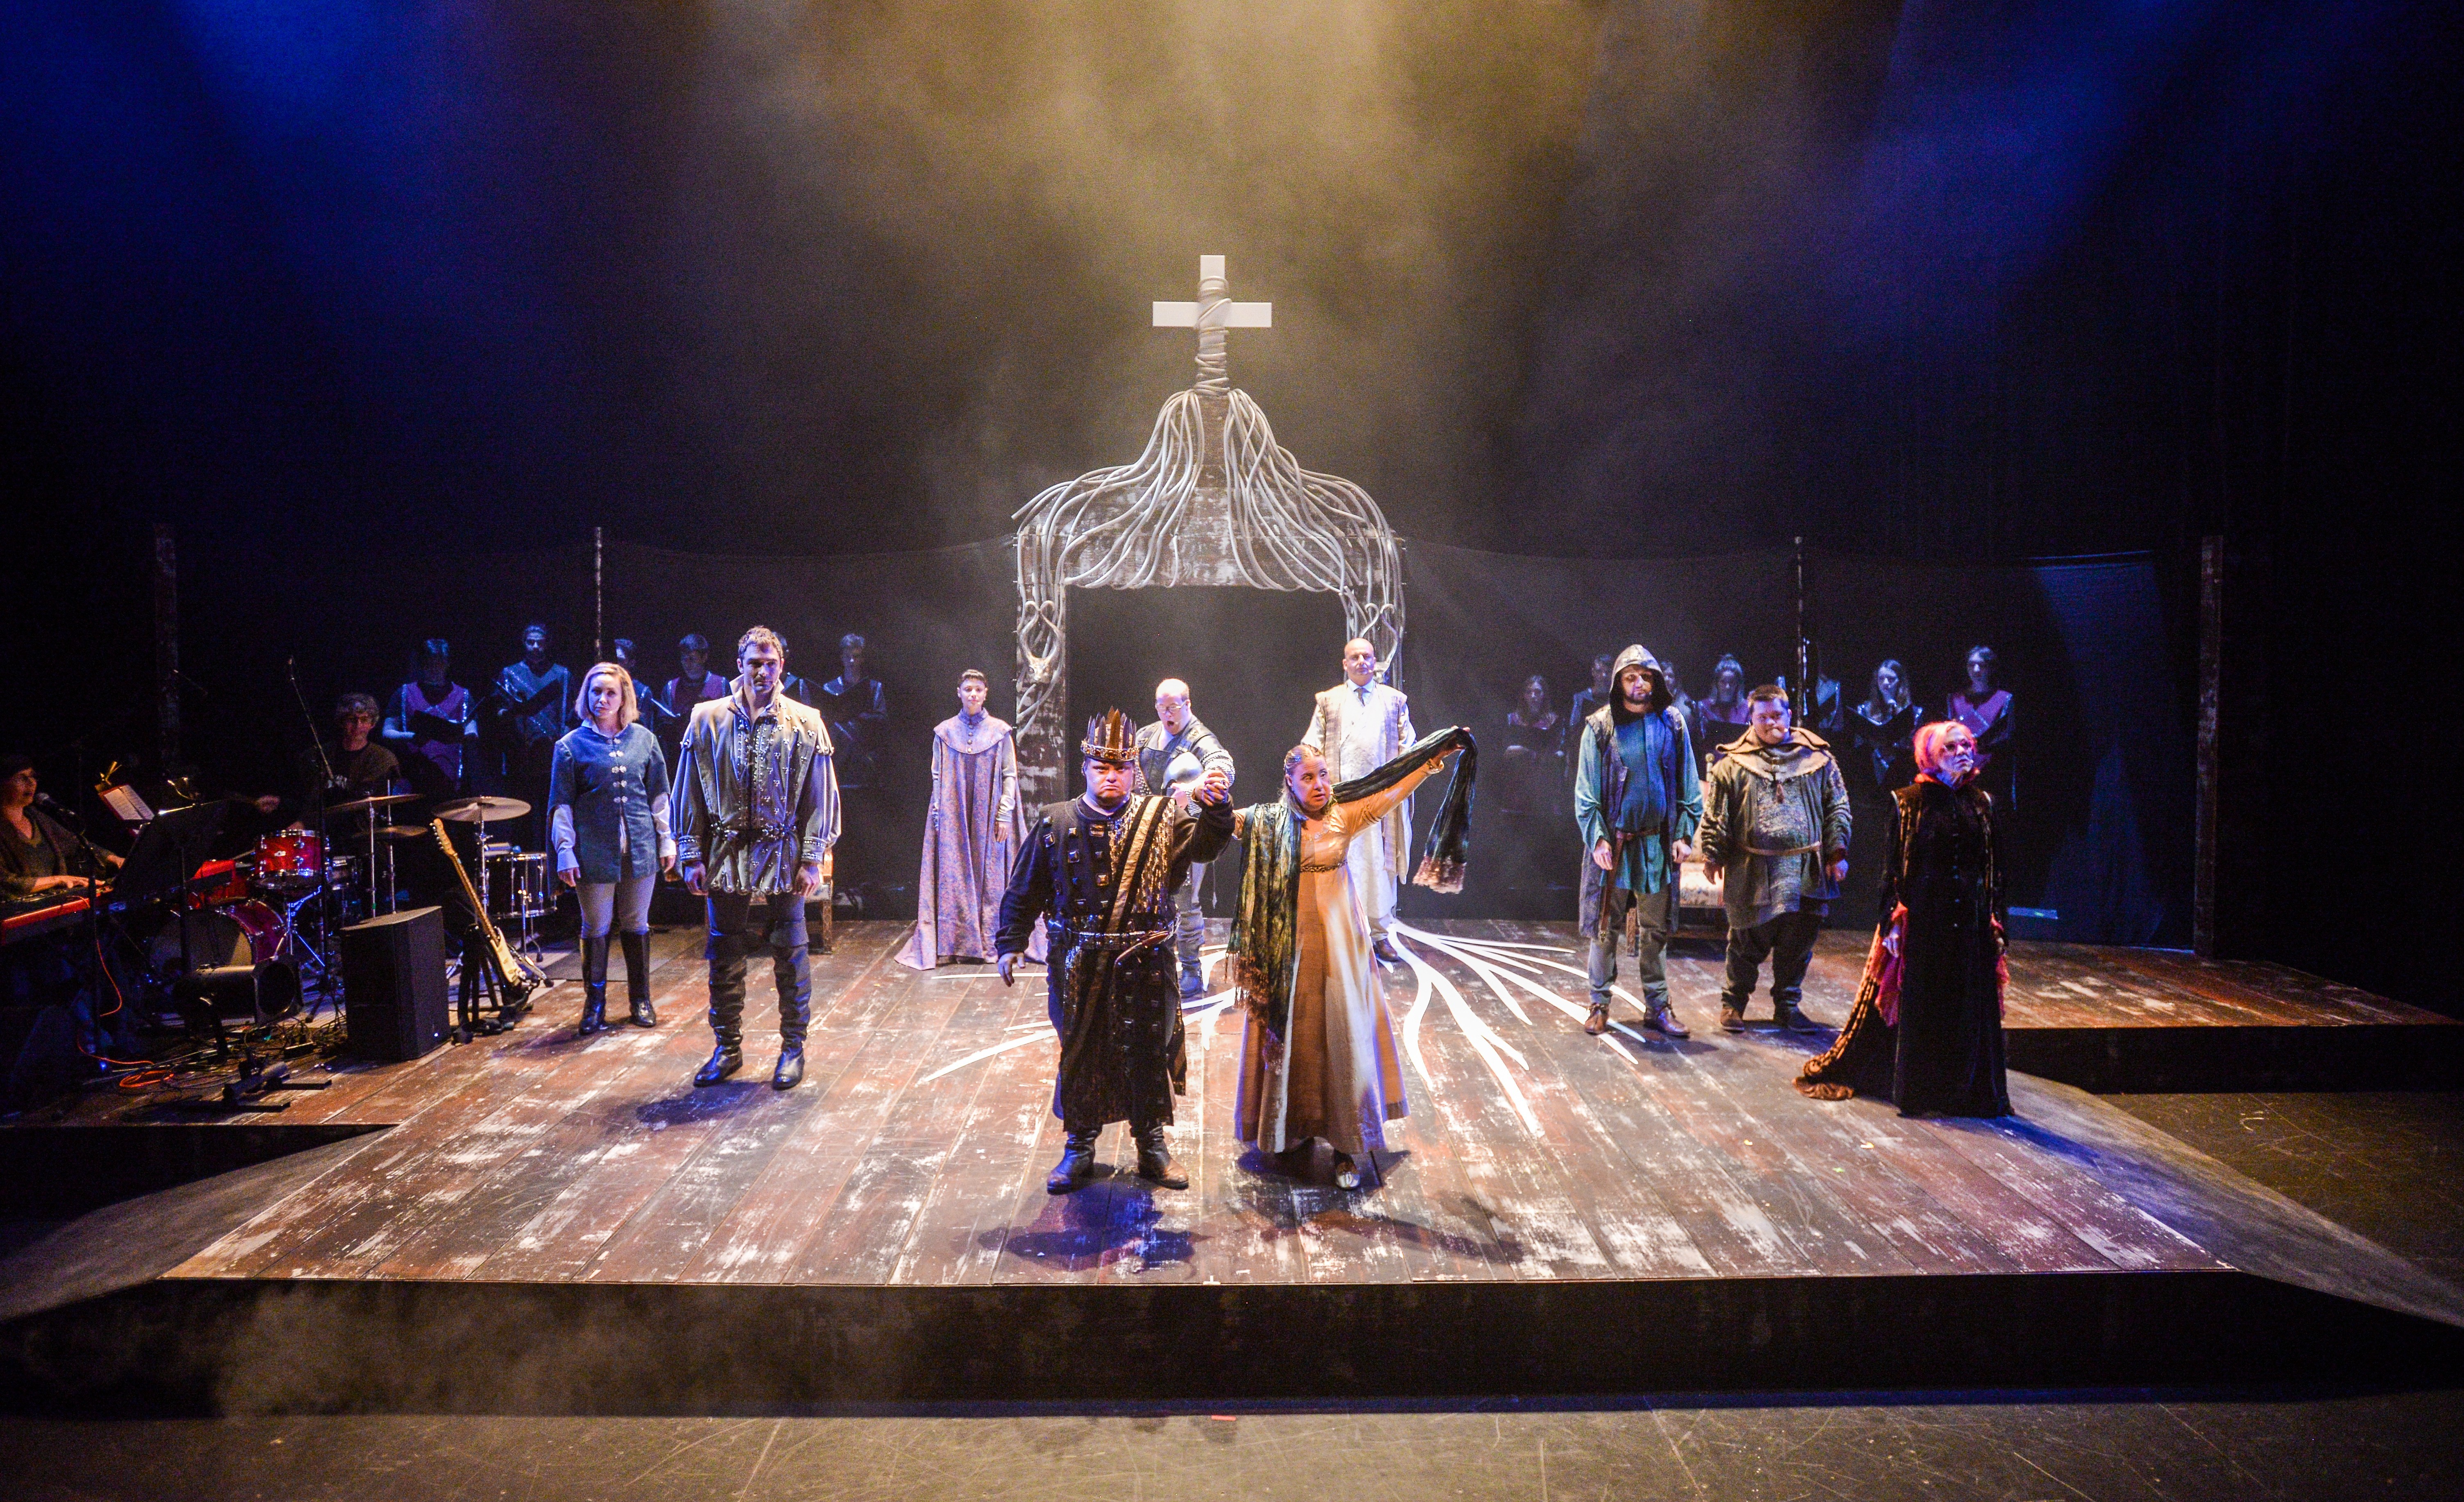 ‘King Arthur’s Night’, a production by Canada’s Neworld Theatre featuring performers with Down syndrome, makes its overseas debut in Hong Kong in March. Photo: Andrew Alexander